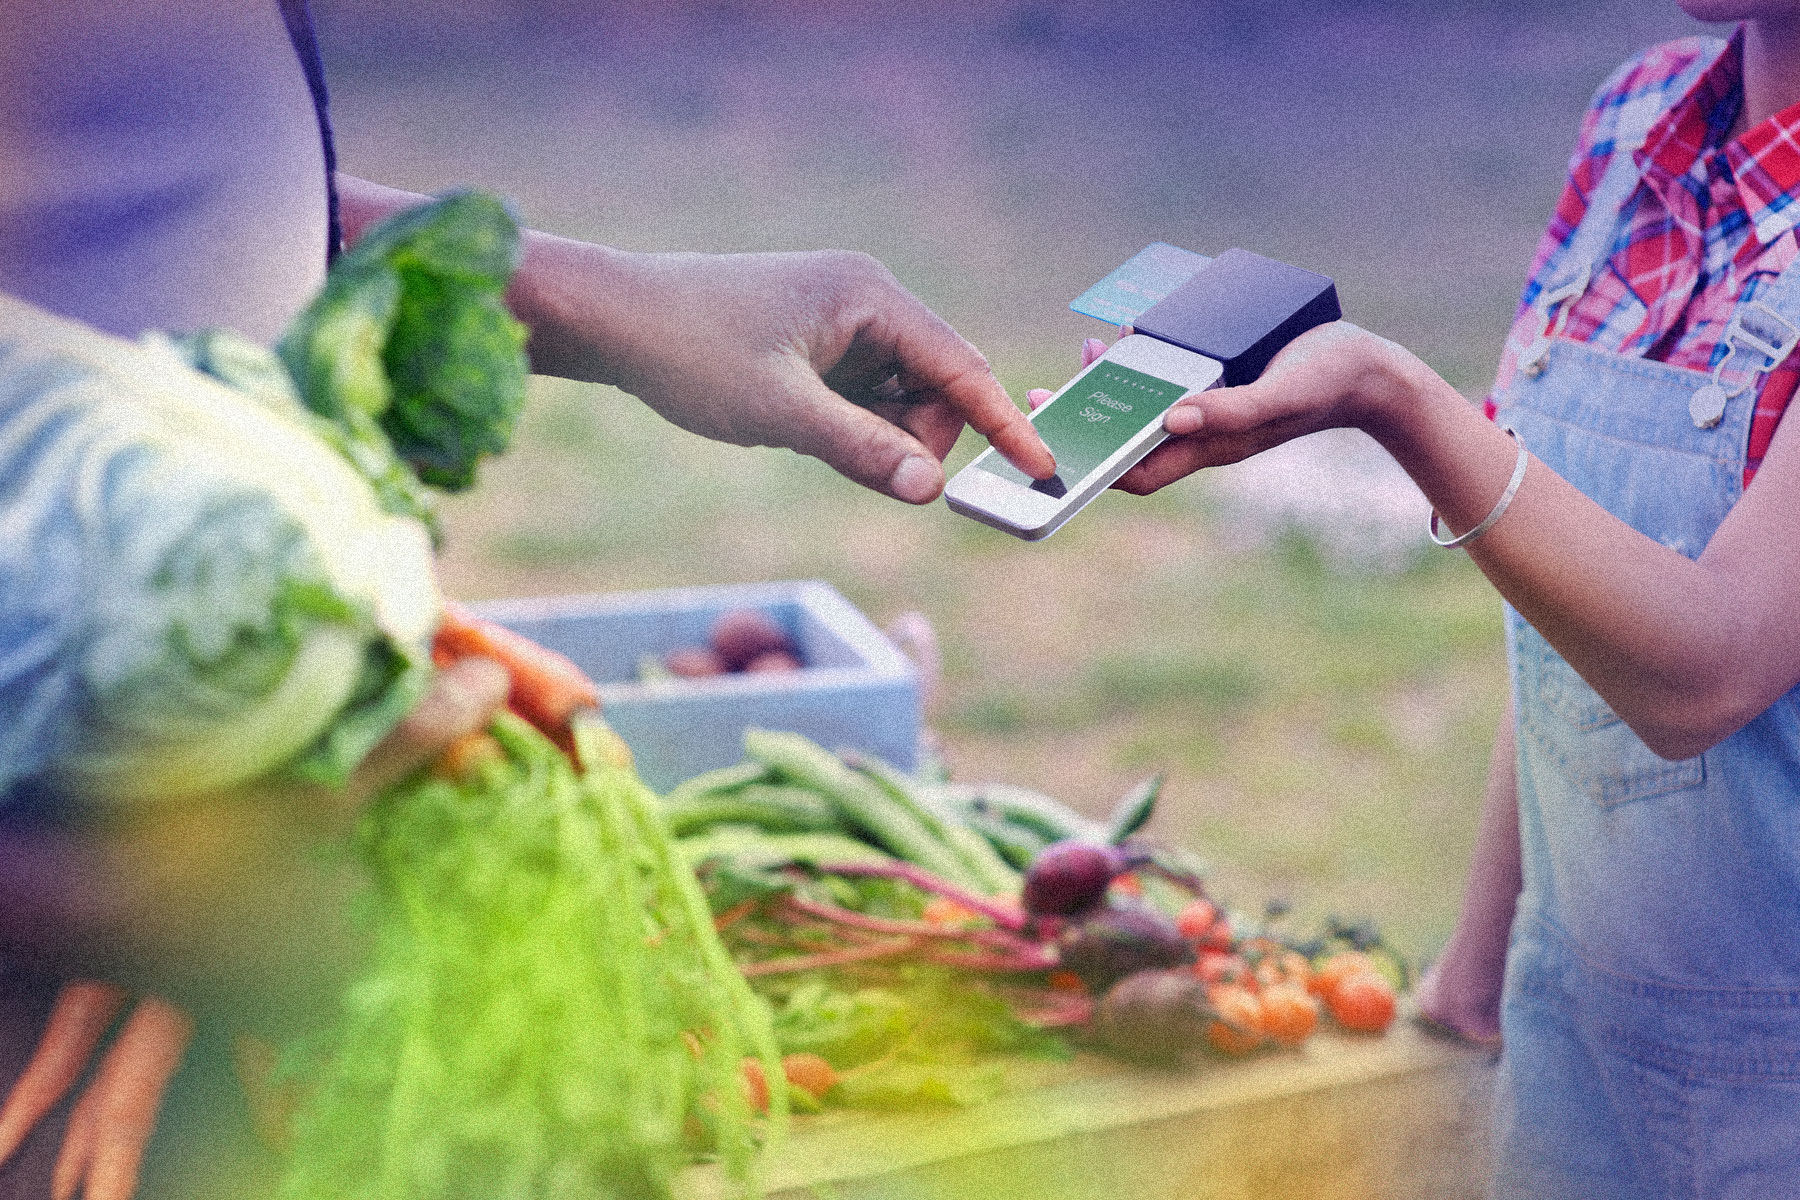 Mobile payment being made